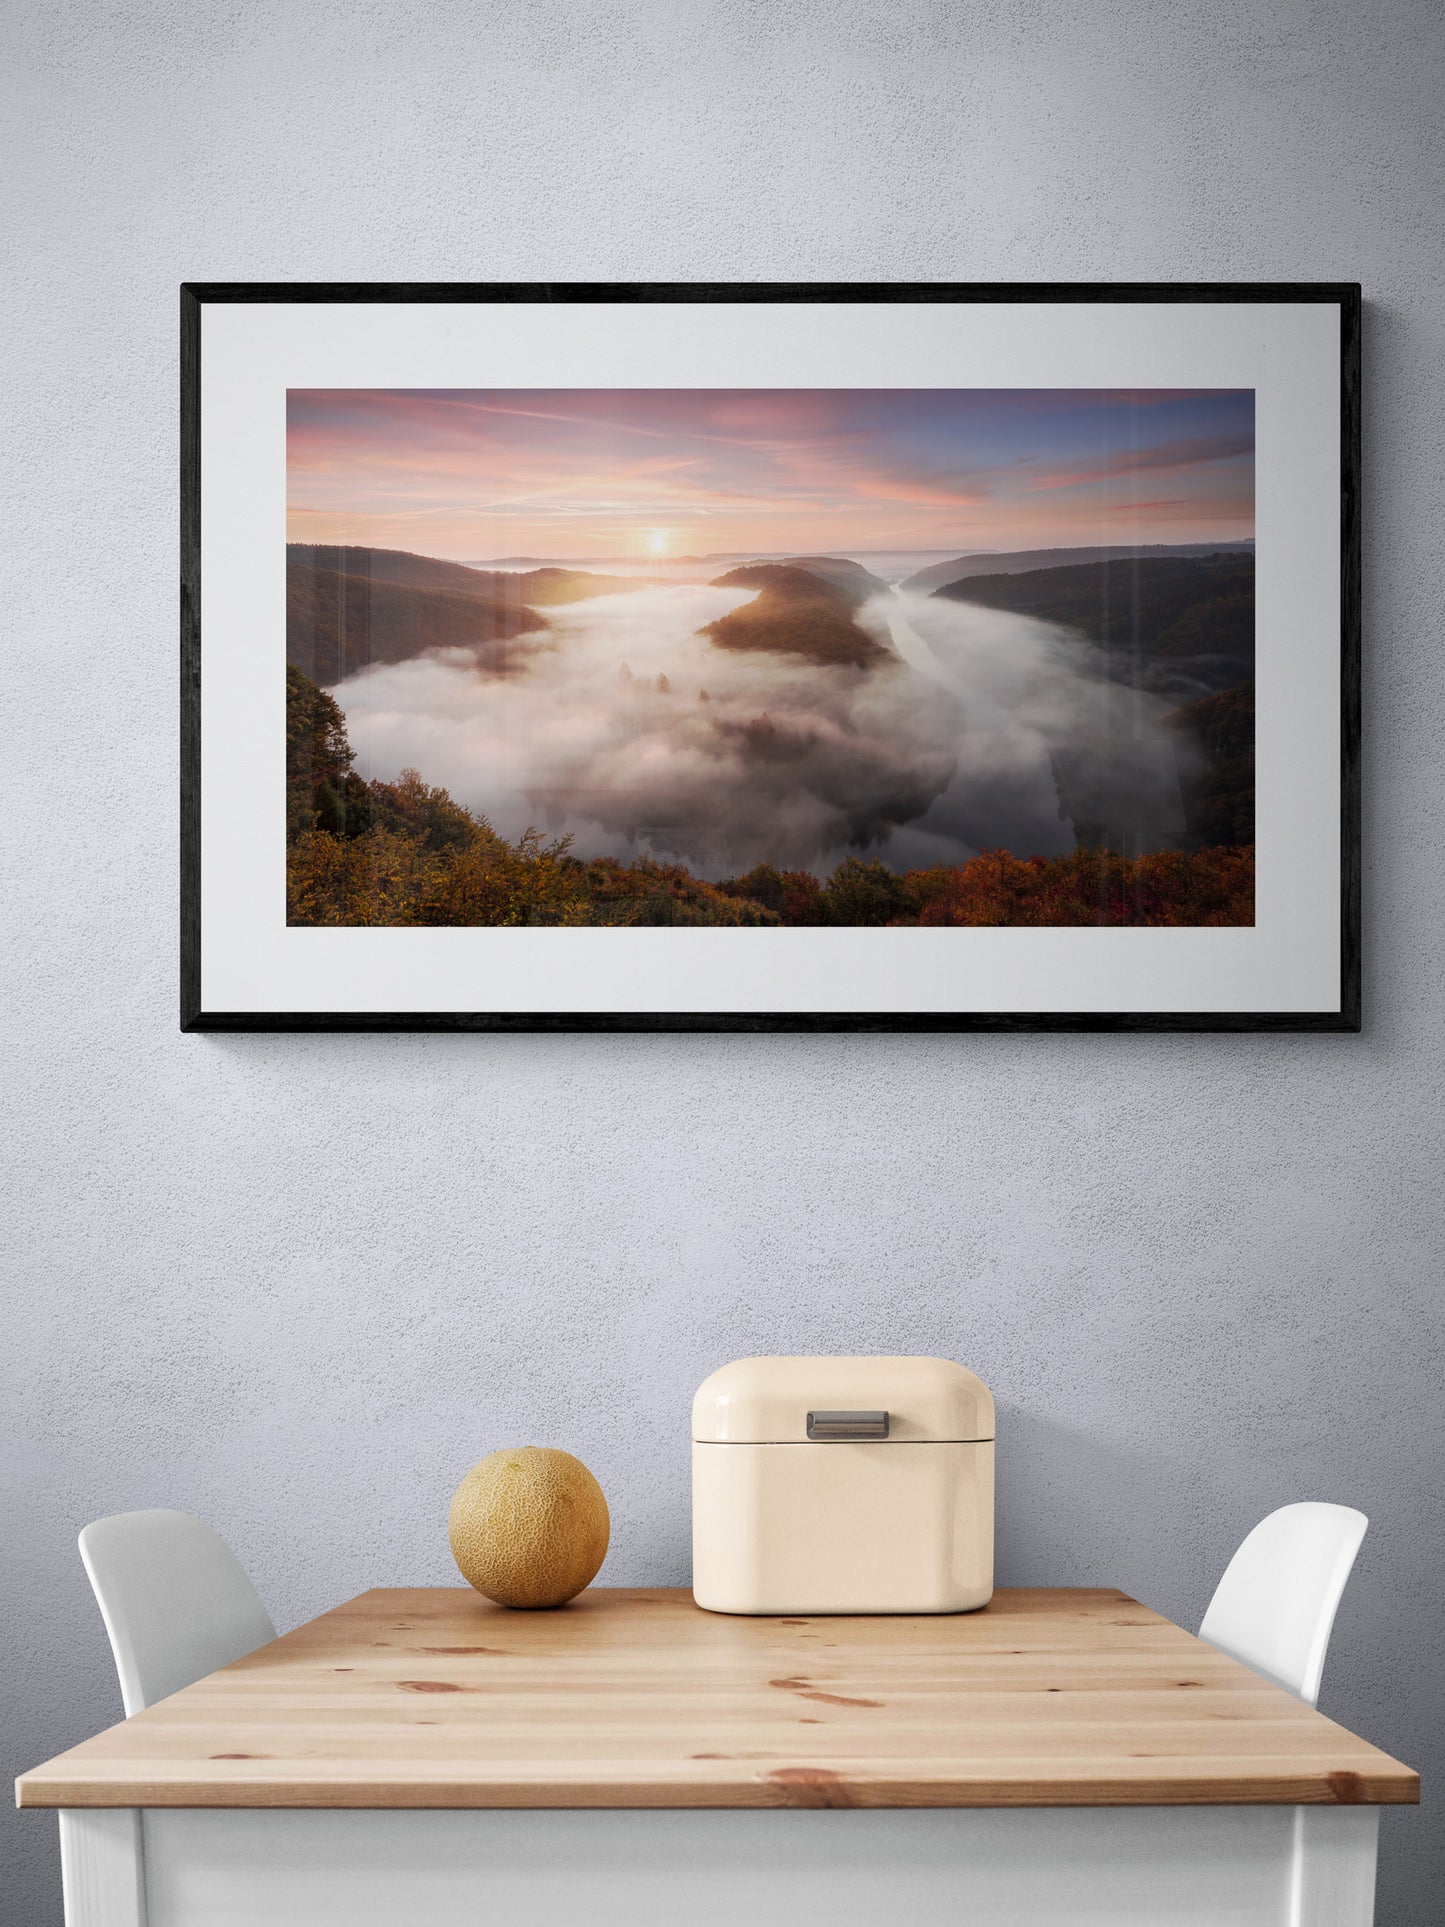 Image Title: The foggy Loop Photographer: Marcus Danz Location: Mettlach, Germany Image description: Mysterious morning fog drifts silently through Mettlach’s Saar loop, partly lit by the warm light of the rising sun. High quality Fine Art print up to 36 inch / around 90 centimeters on Hahnemühle paper available. Large variant over kitchen table.